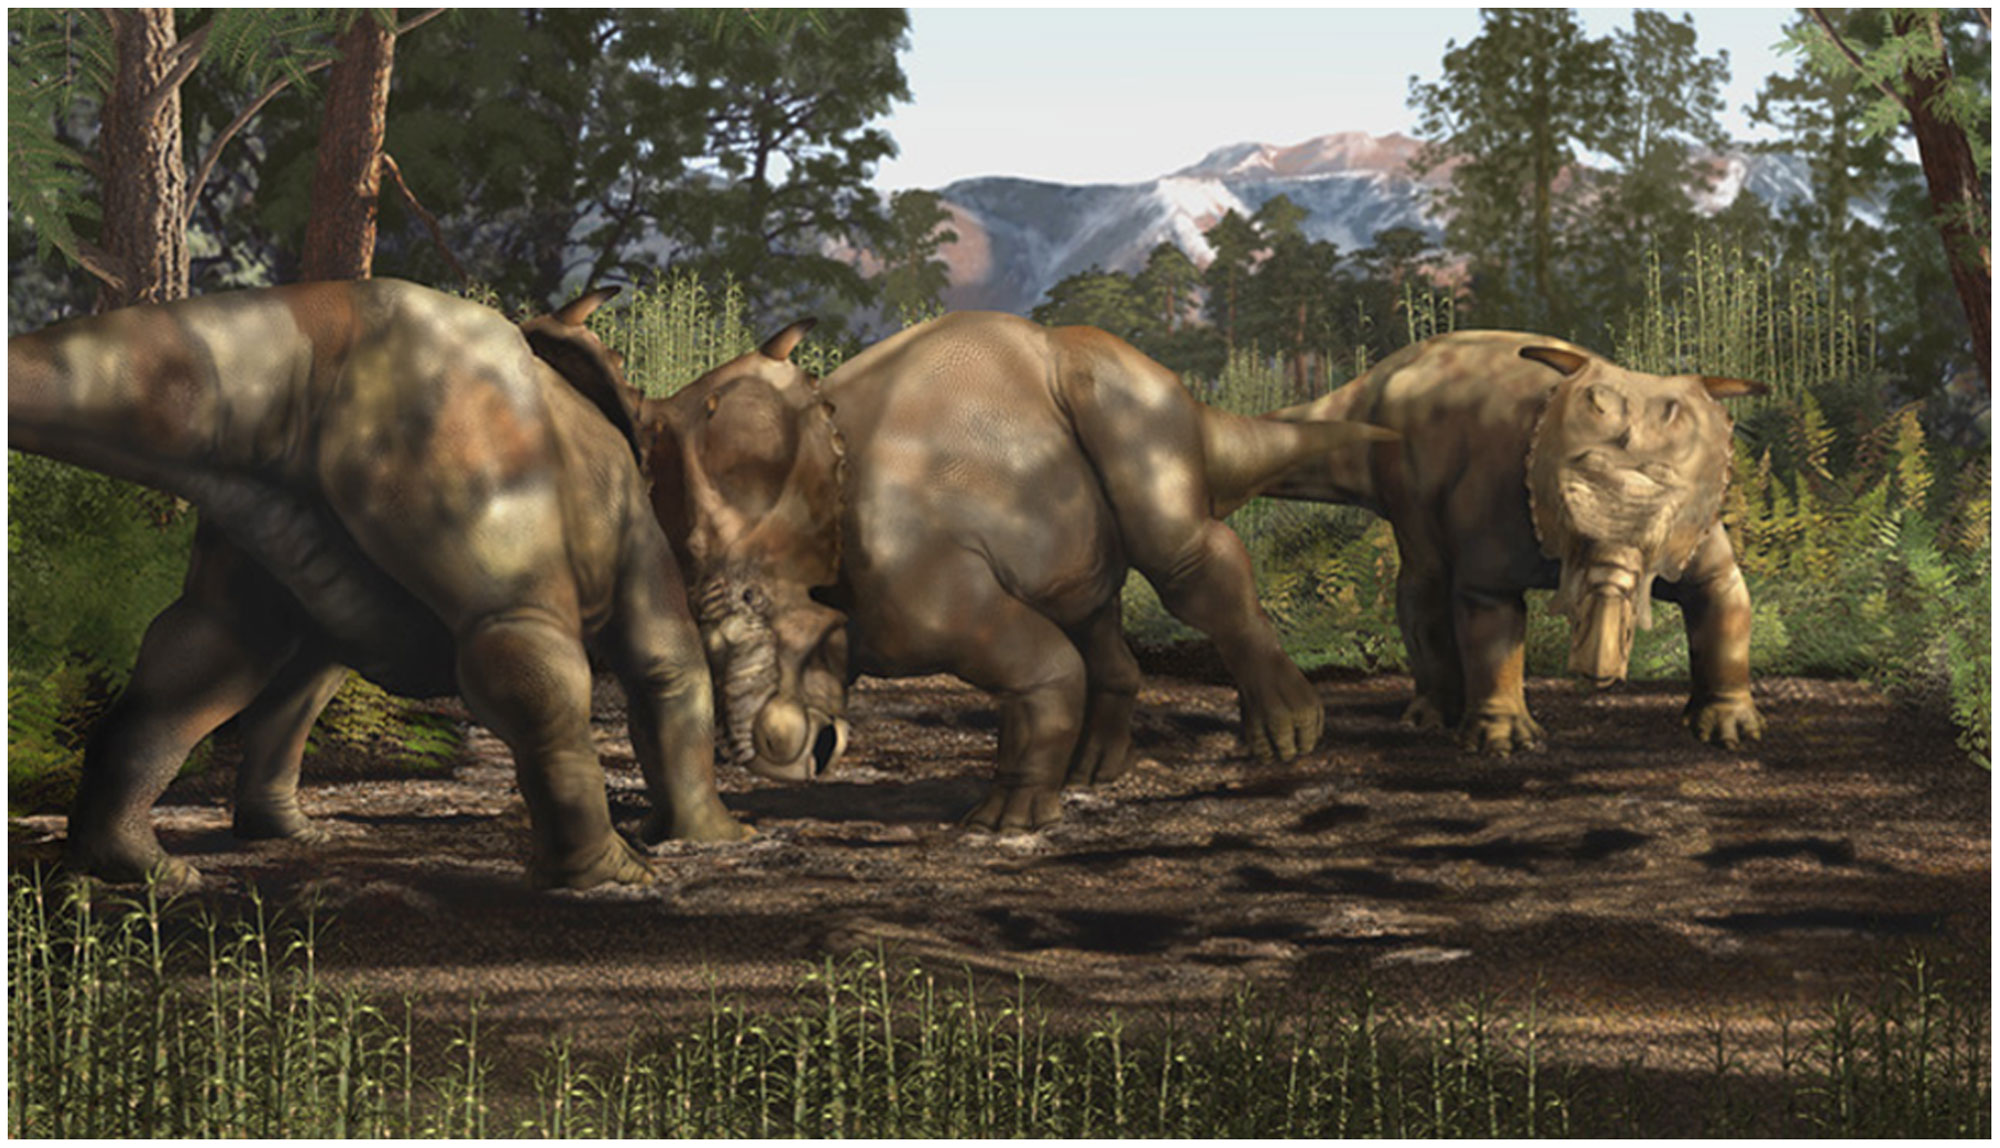 Illustration of three Pachyrhinosaurs in a Cretaceous landscape. The Pachyrhinosaurs walk on four legs, have stout bodies, and large heads. A frill extends backwards and upwards from the head and has two horns at the top pointed outward. The mouth is beak-like. Two animals are butting heads whereas one stands off to the side, watching them. Horsetails and conifers populate the landscape, and mountains rise in the background.